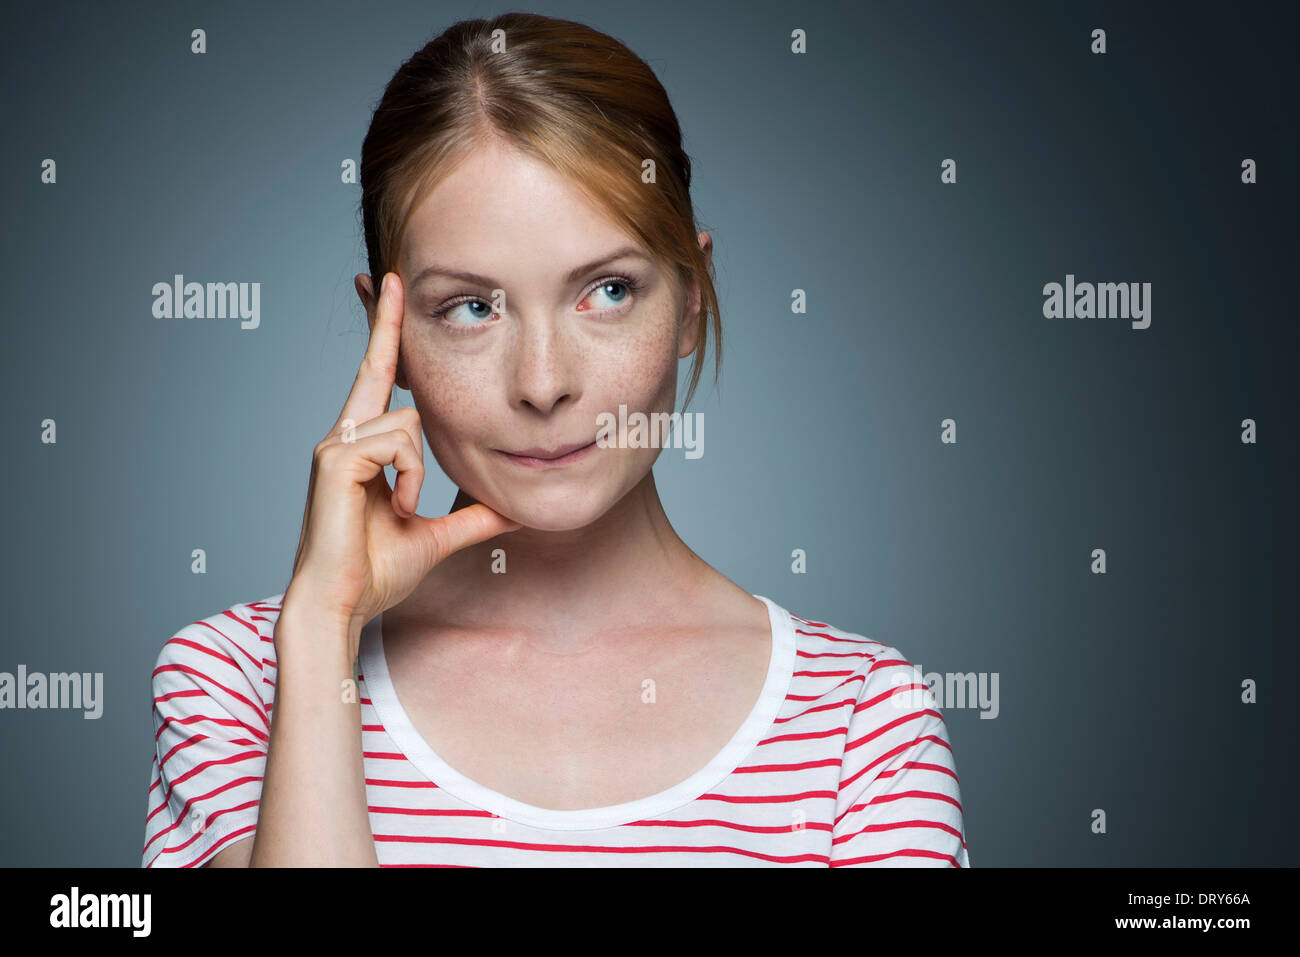 Young woman contemplating Stock Photo